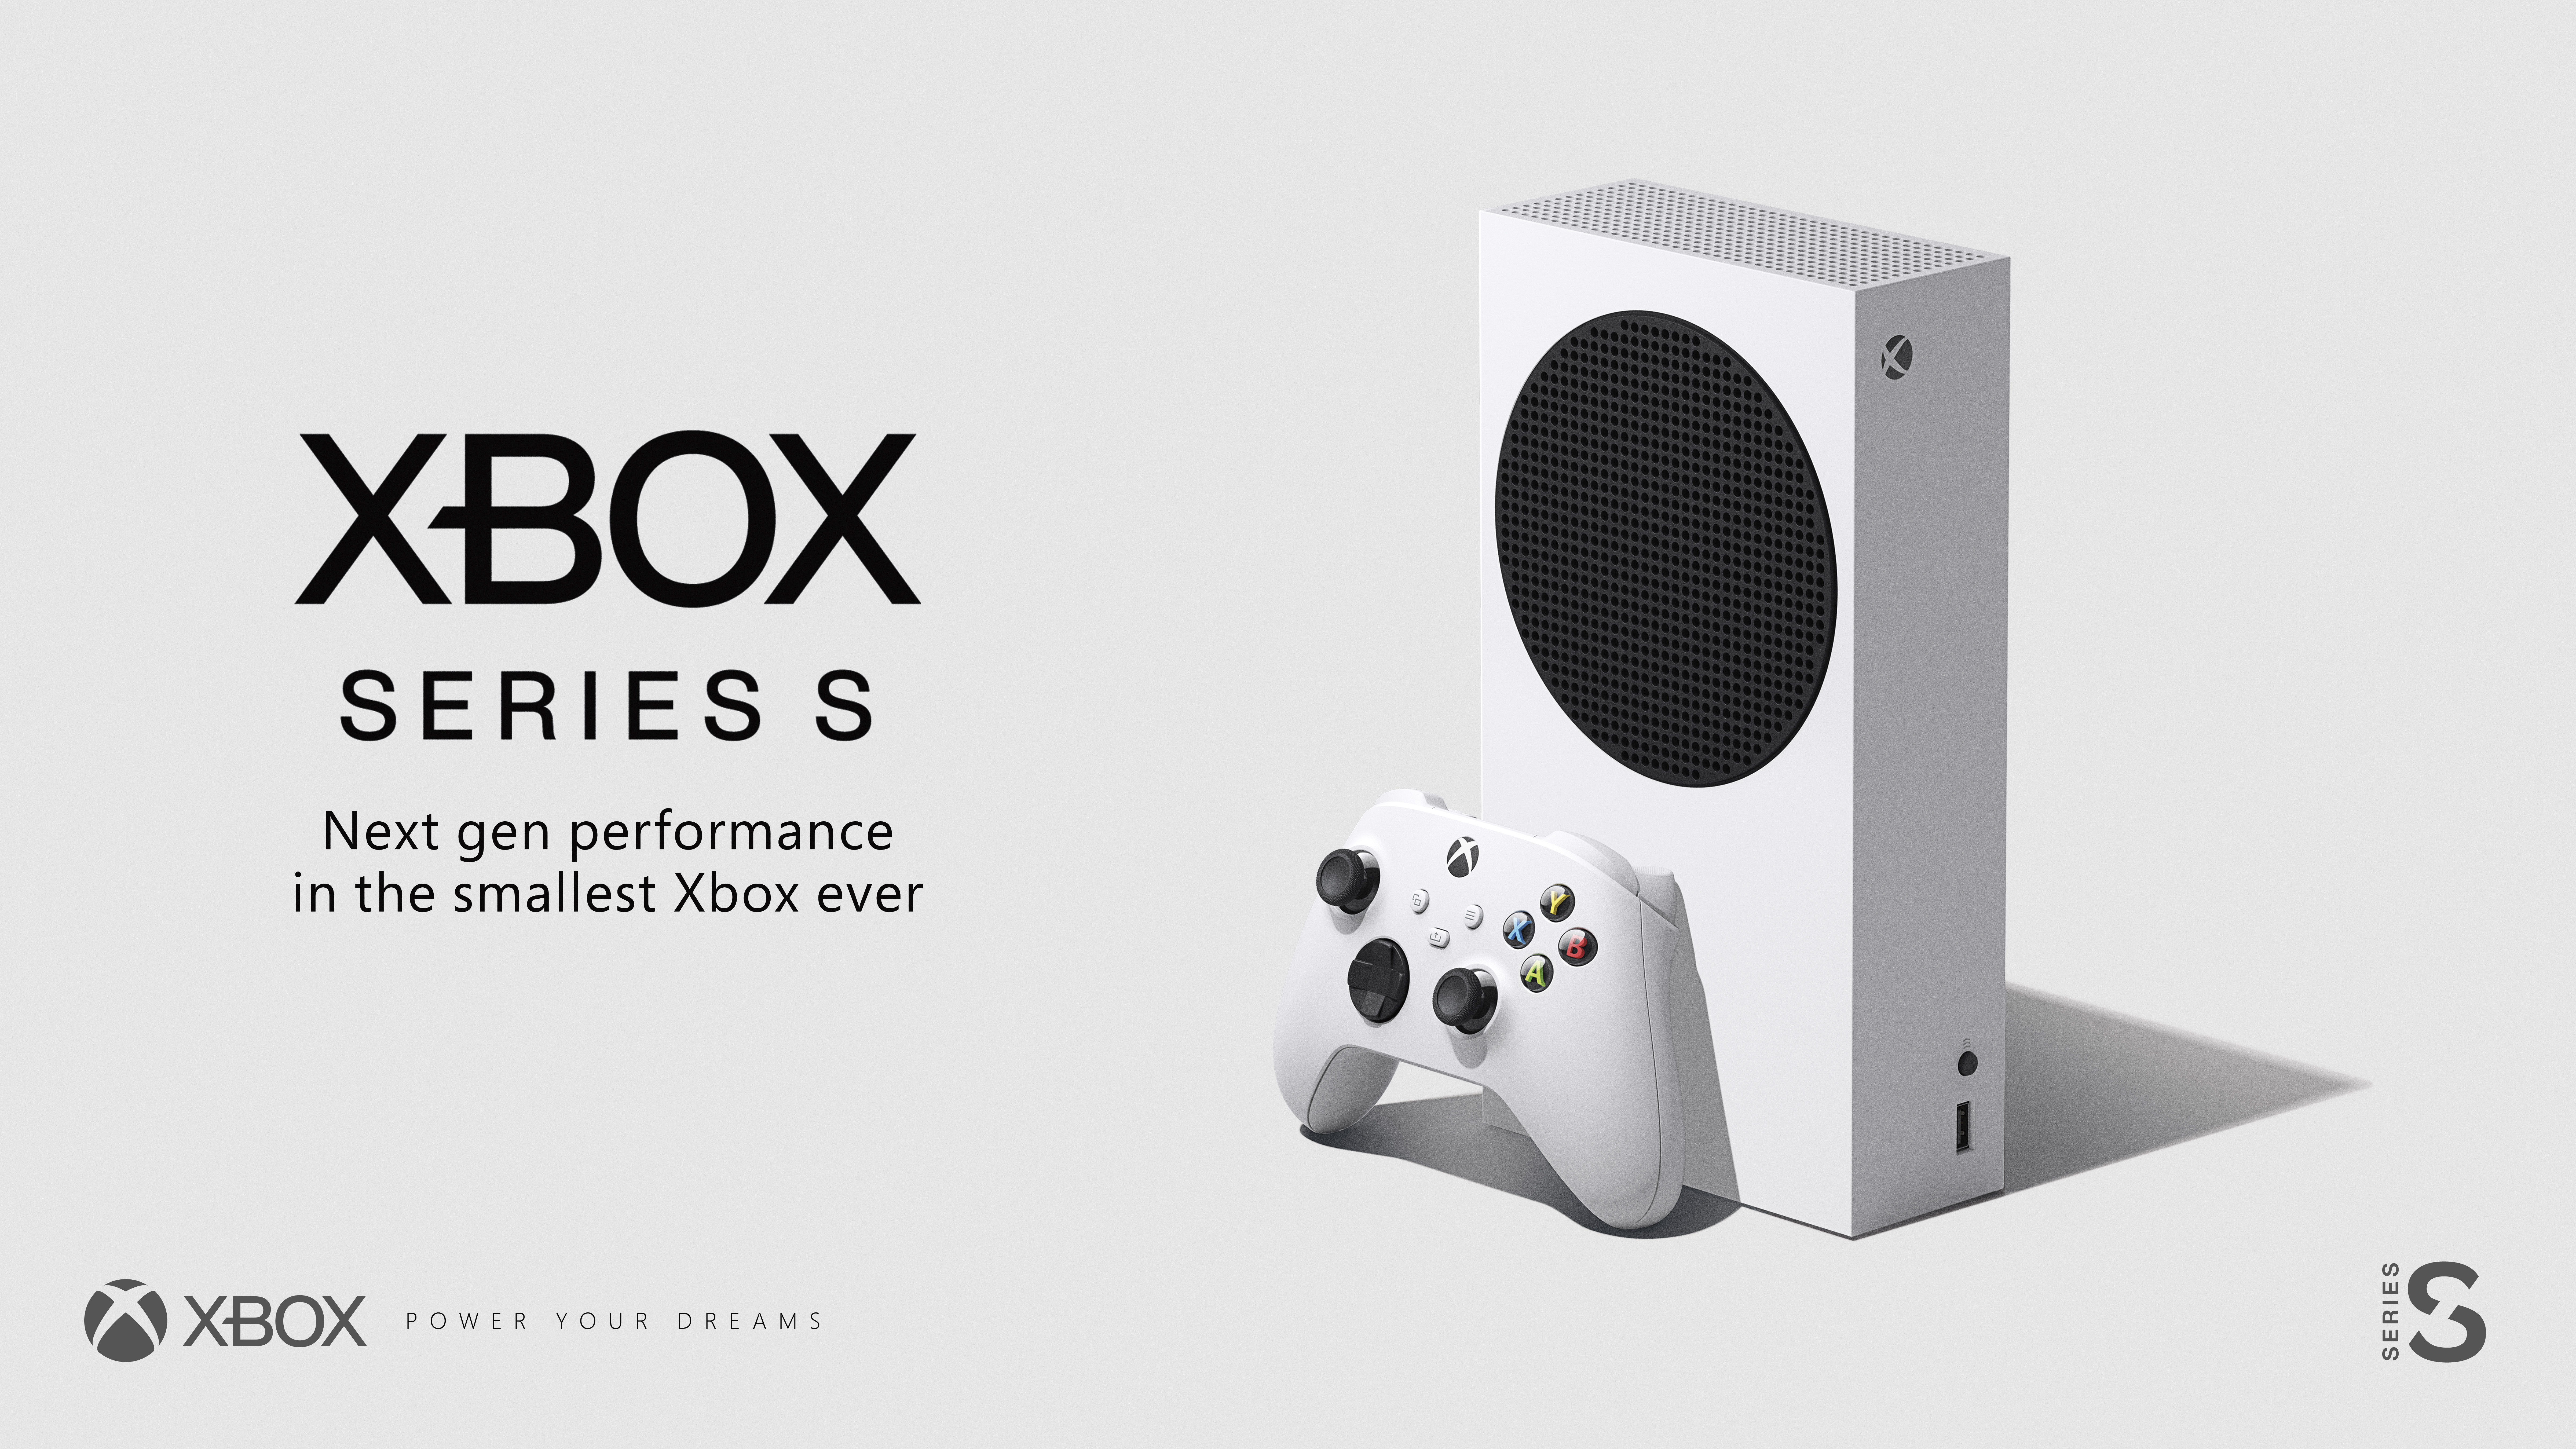 Introducing Xbox Series S, Delivering Next-Gen Performance in Our 